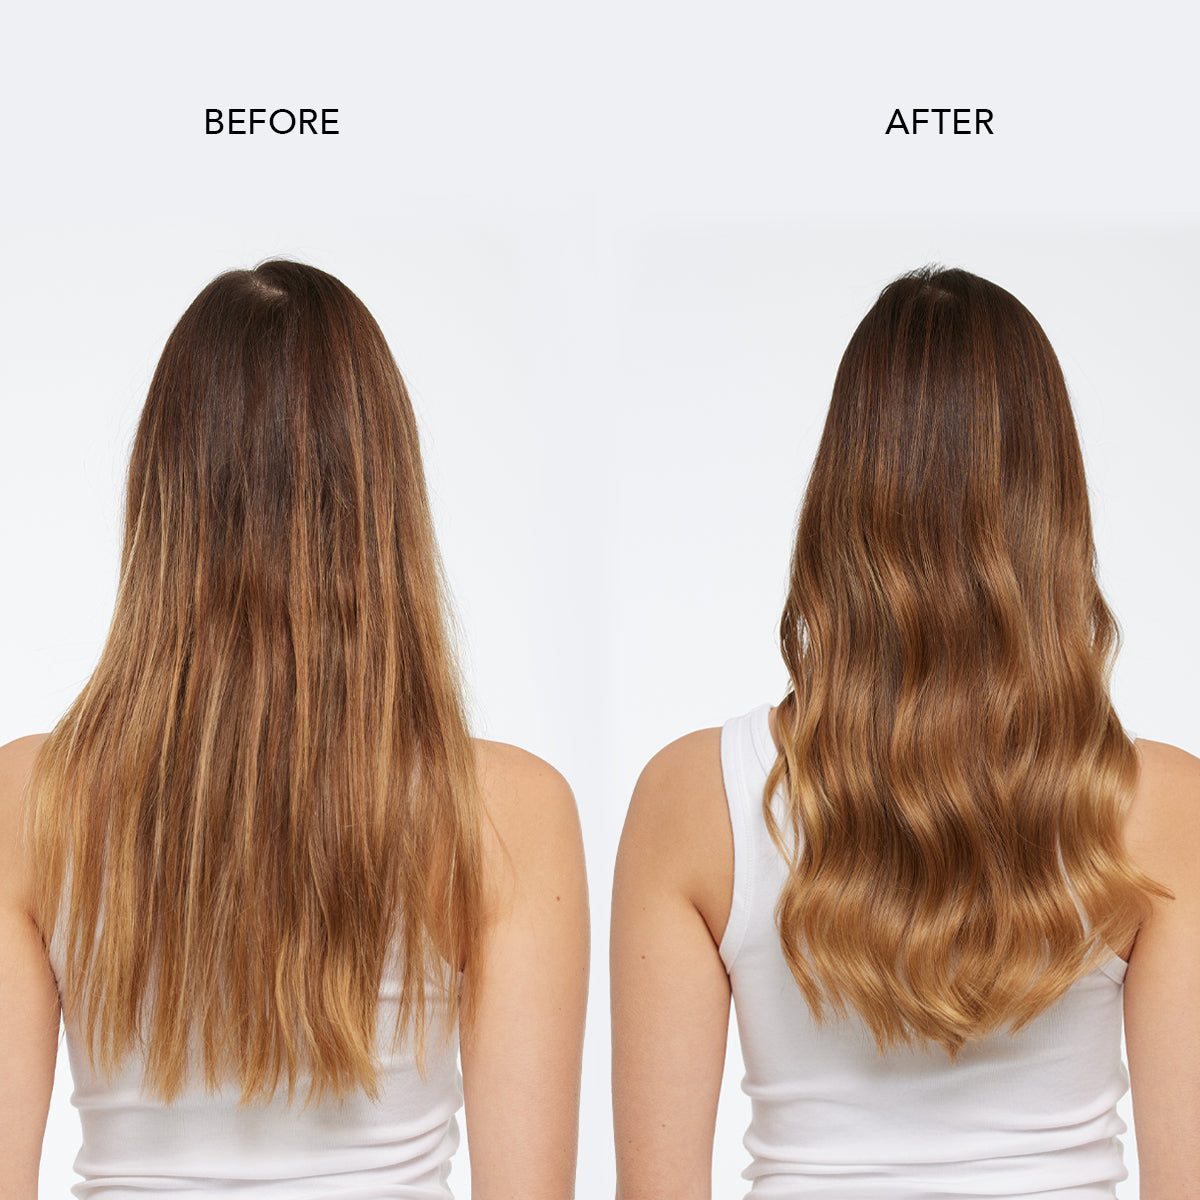 Non-comedogenic shampoo before and after